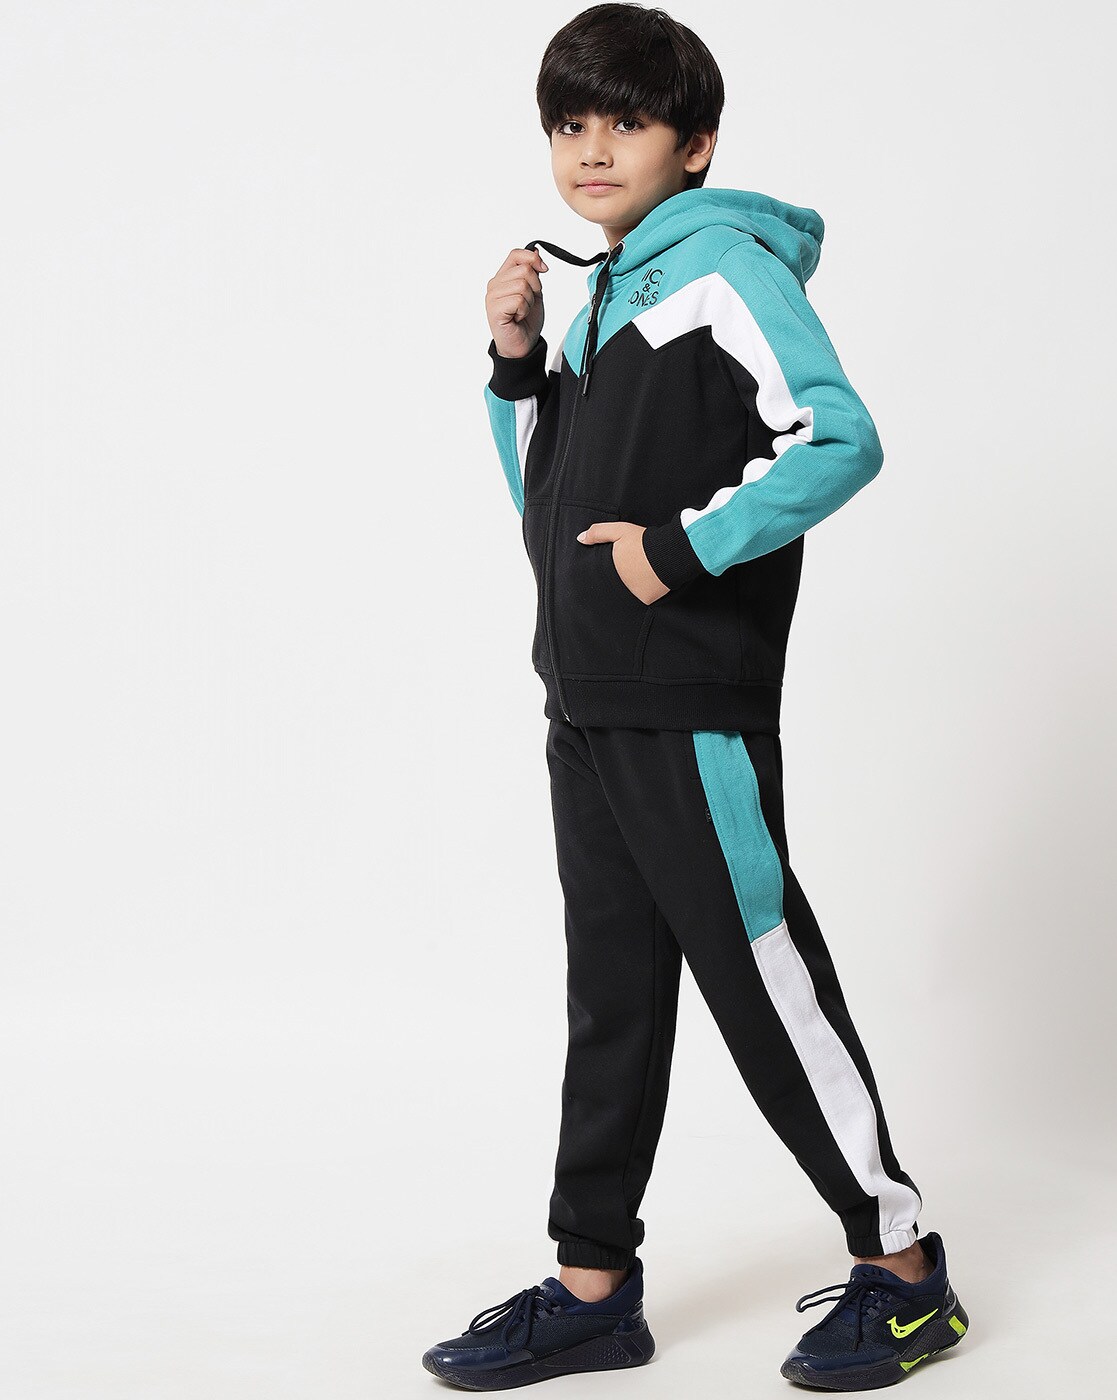 Boys 100% Polyester Sports Wear Tracksuit / Boys Tracksuit Plain Contrast  With Stripes Fleece Hooded $7.6 - Wholesale China Boy's Tracksuit at  factory prices from Shenzhen Twinkle Star Textile Co.,Ltd |  Globalsources.com